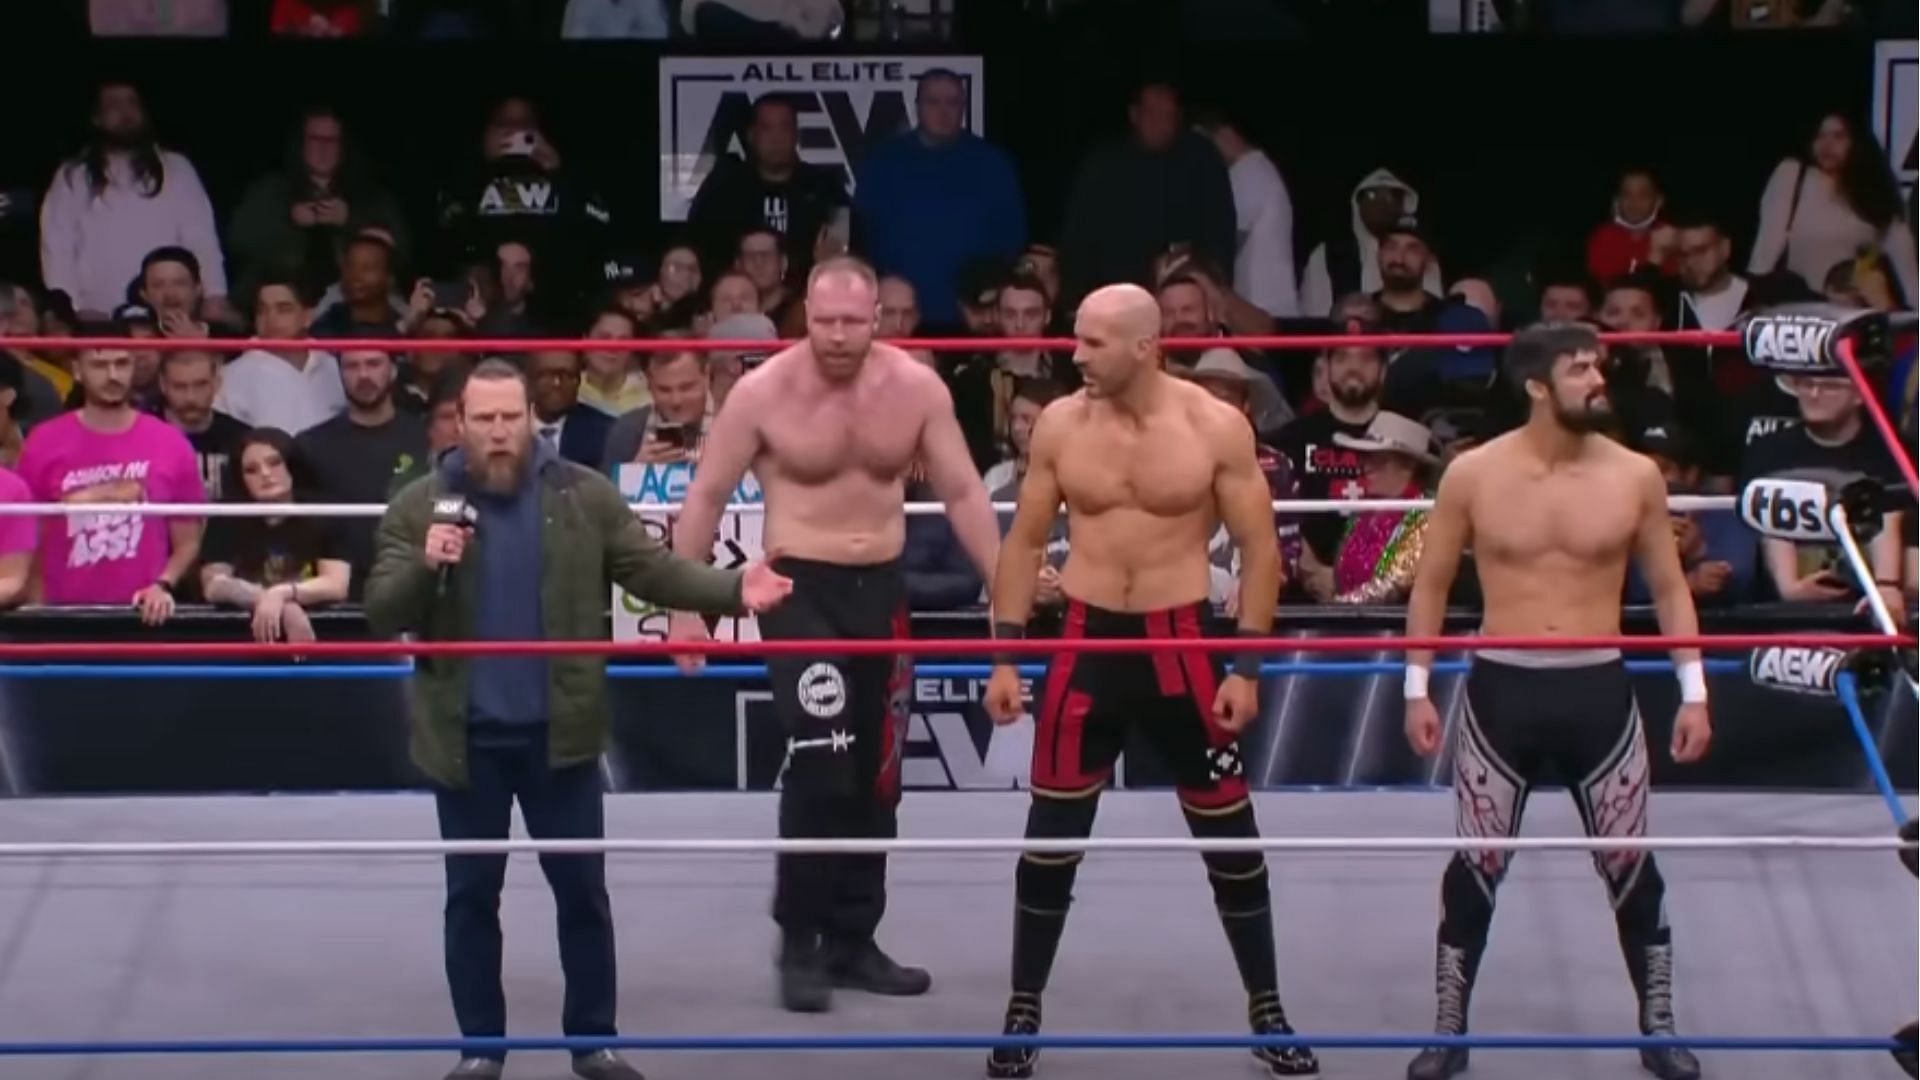 The Blackpool Combat Club is a top stable in AEW [Image Credits: AEW